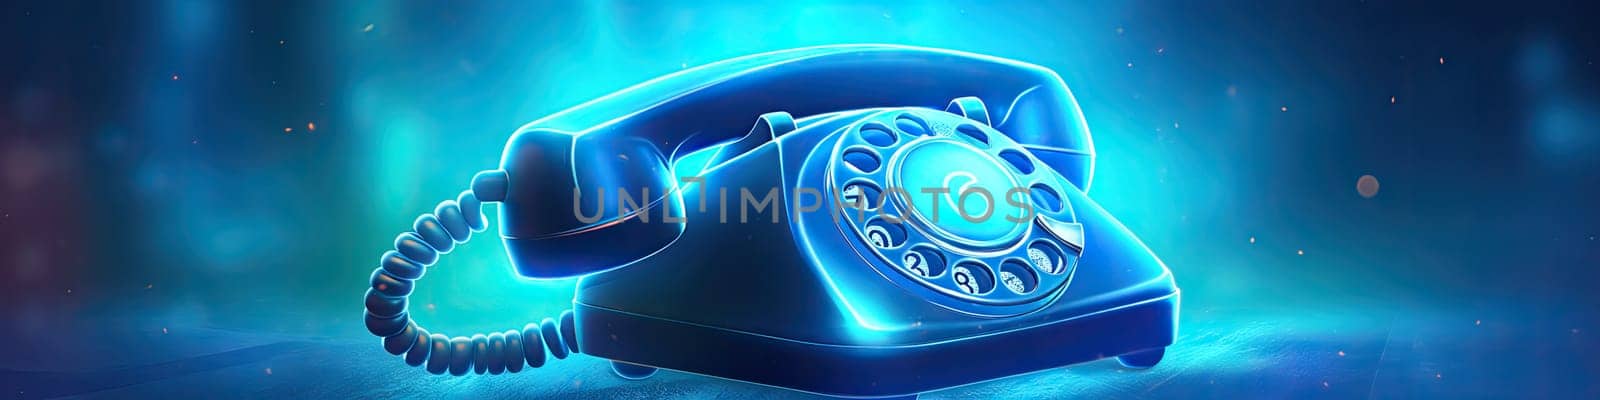 Telephone isolated on the blue and purple glowing background by Kadula